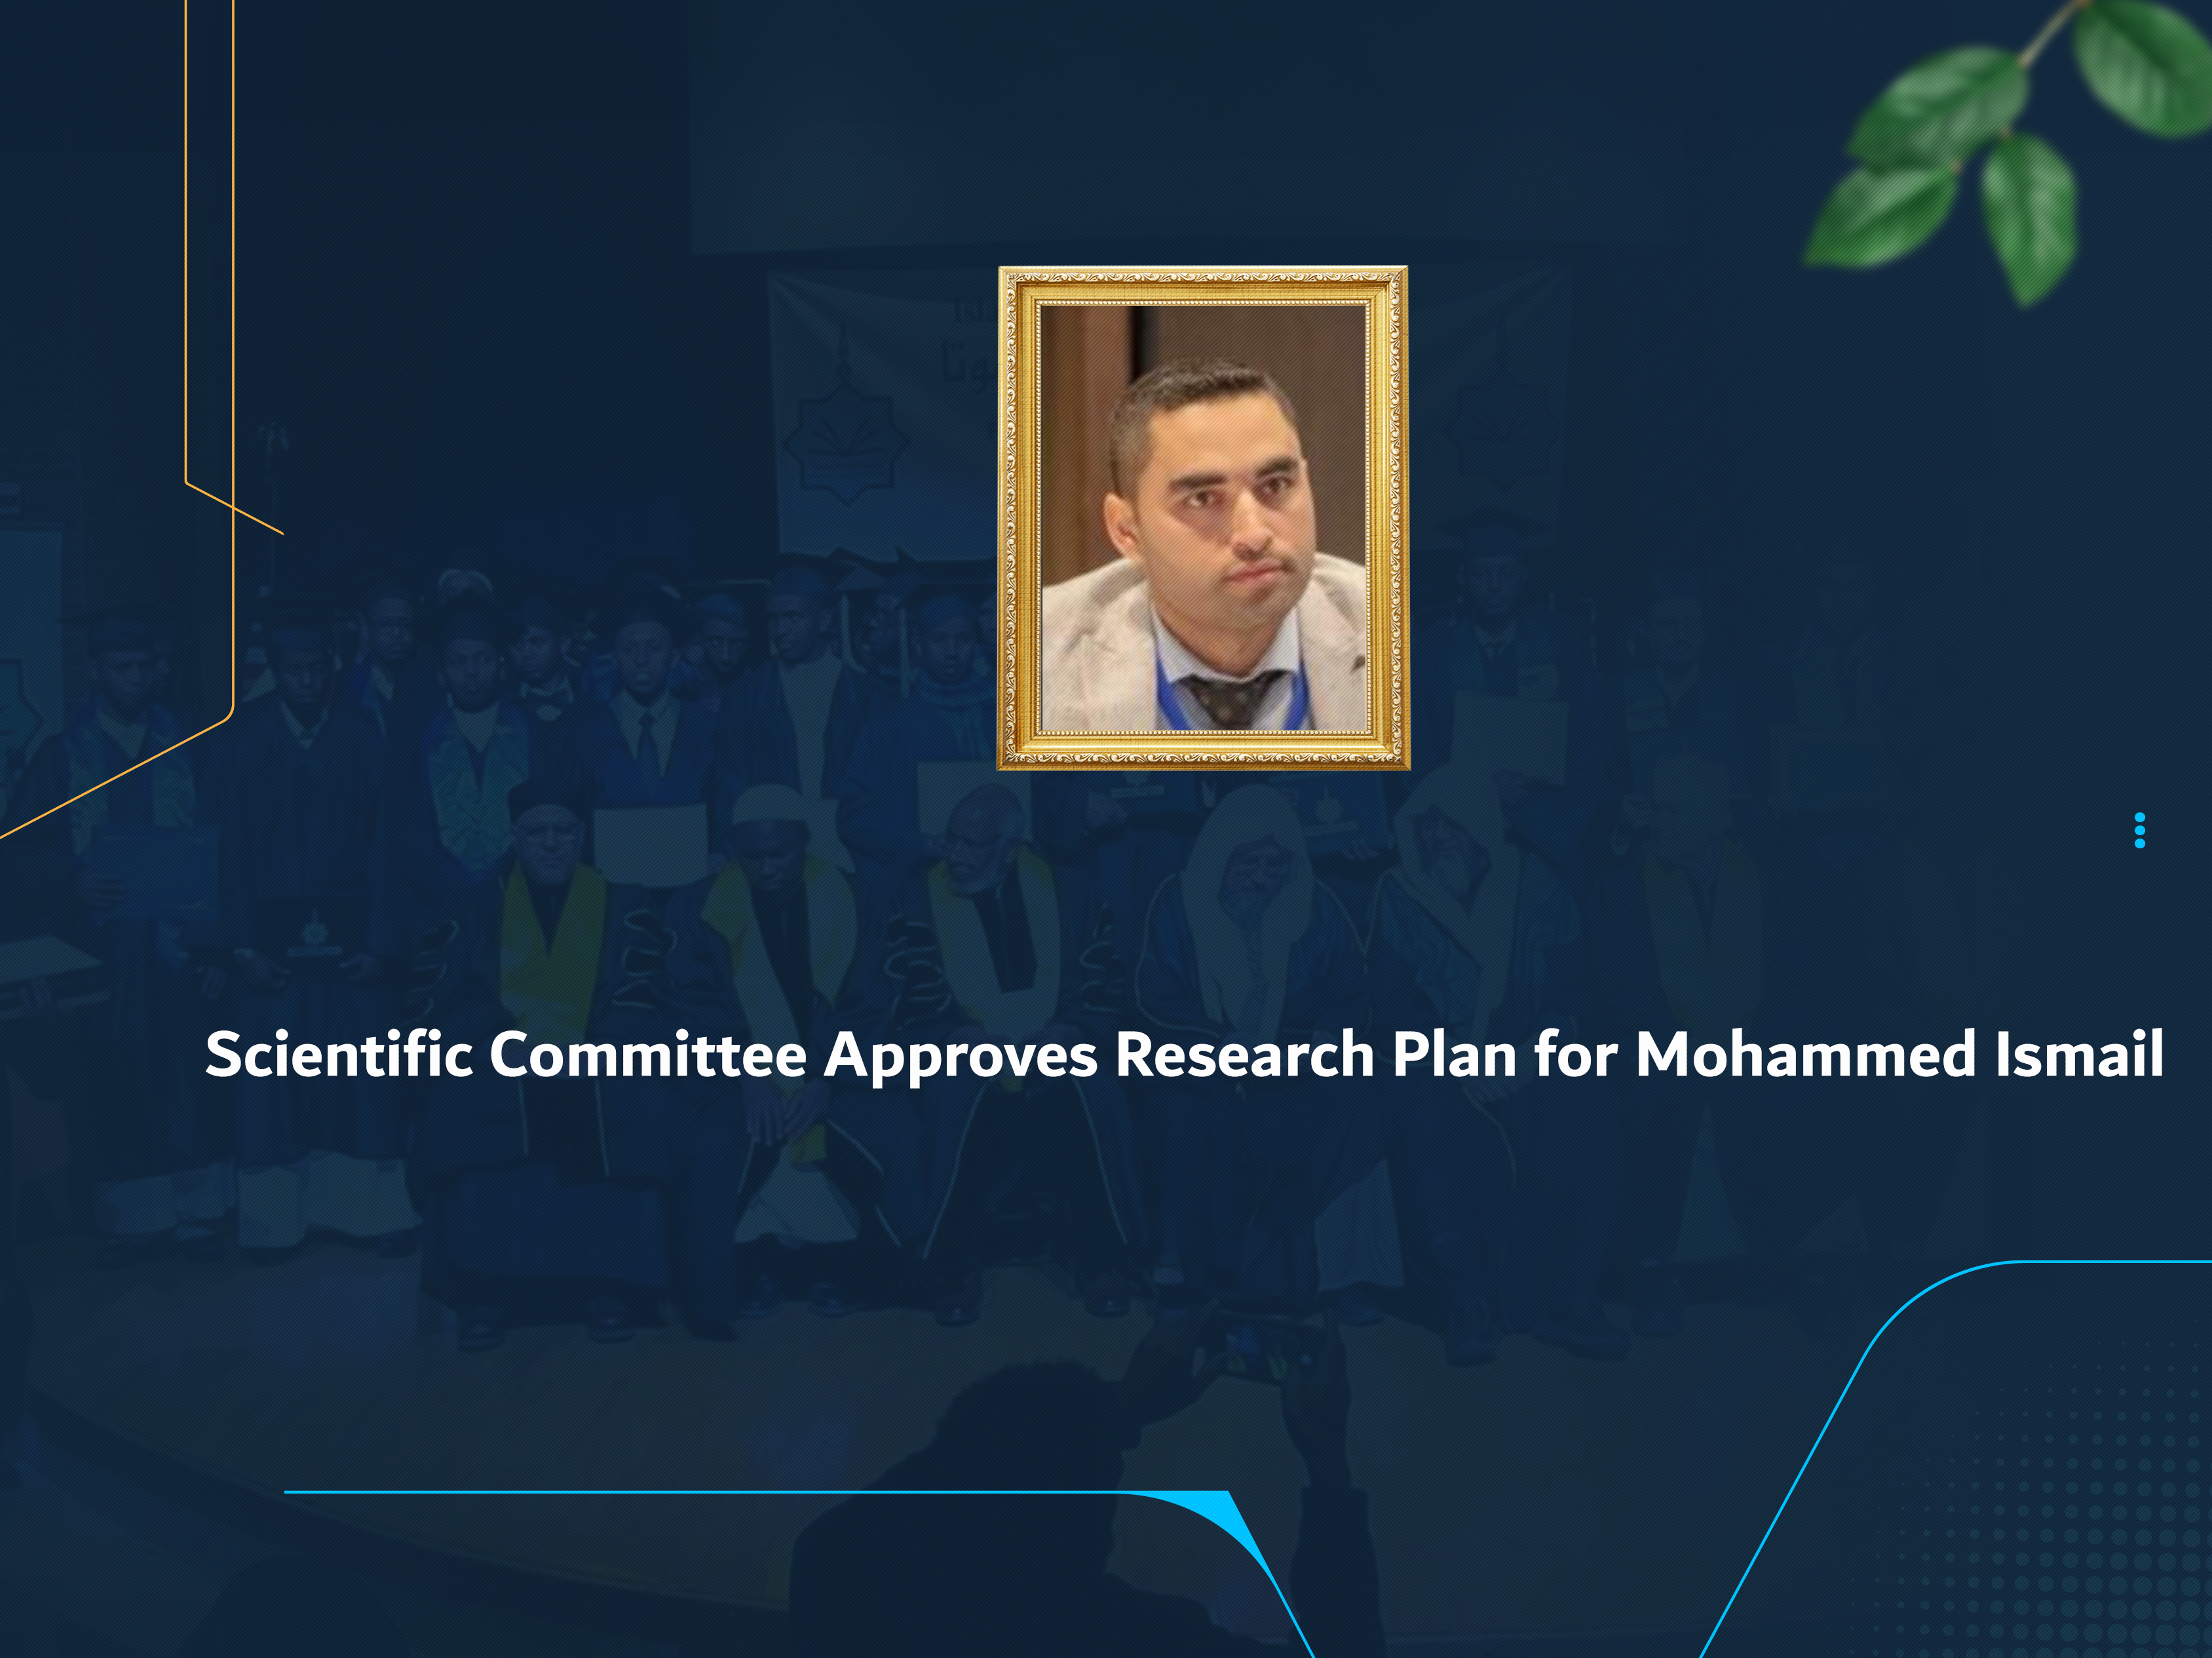 Scientific Committee Approves Research Plan for Mohammed Ismail